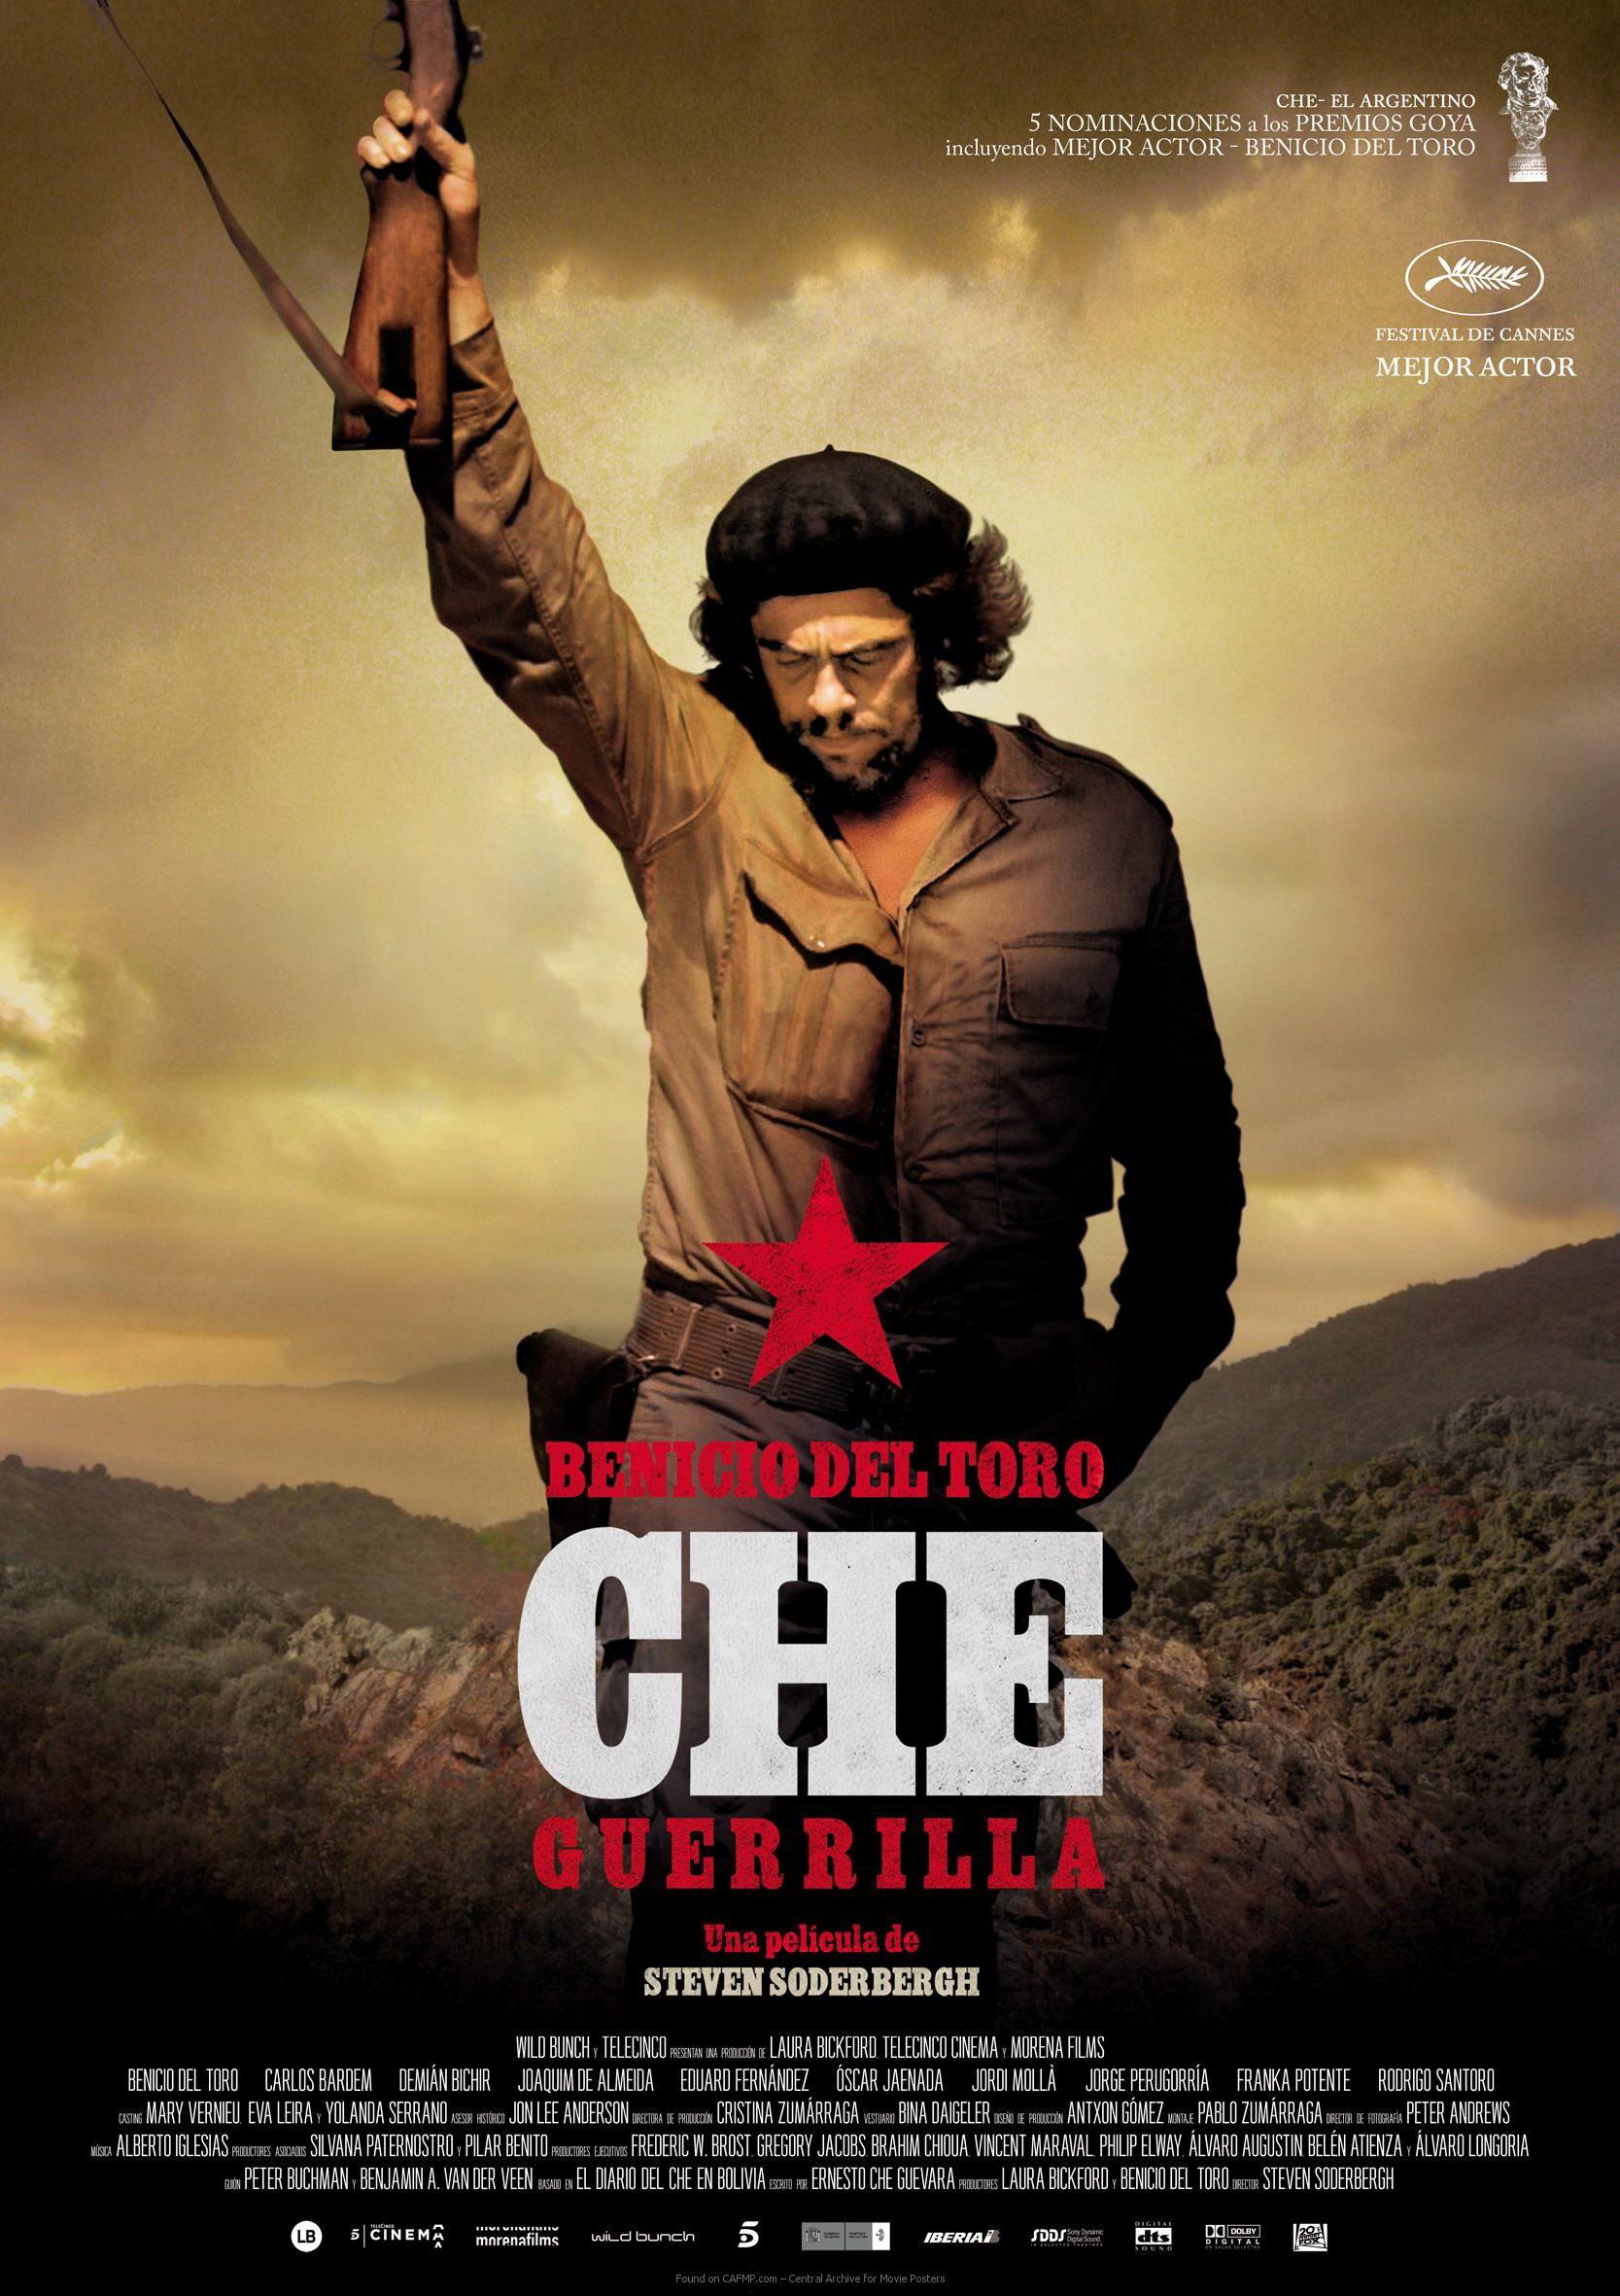 Movie Poster Che Guerrilla On Cafmp 